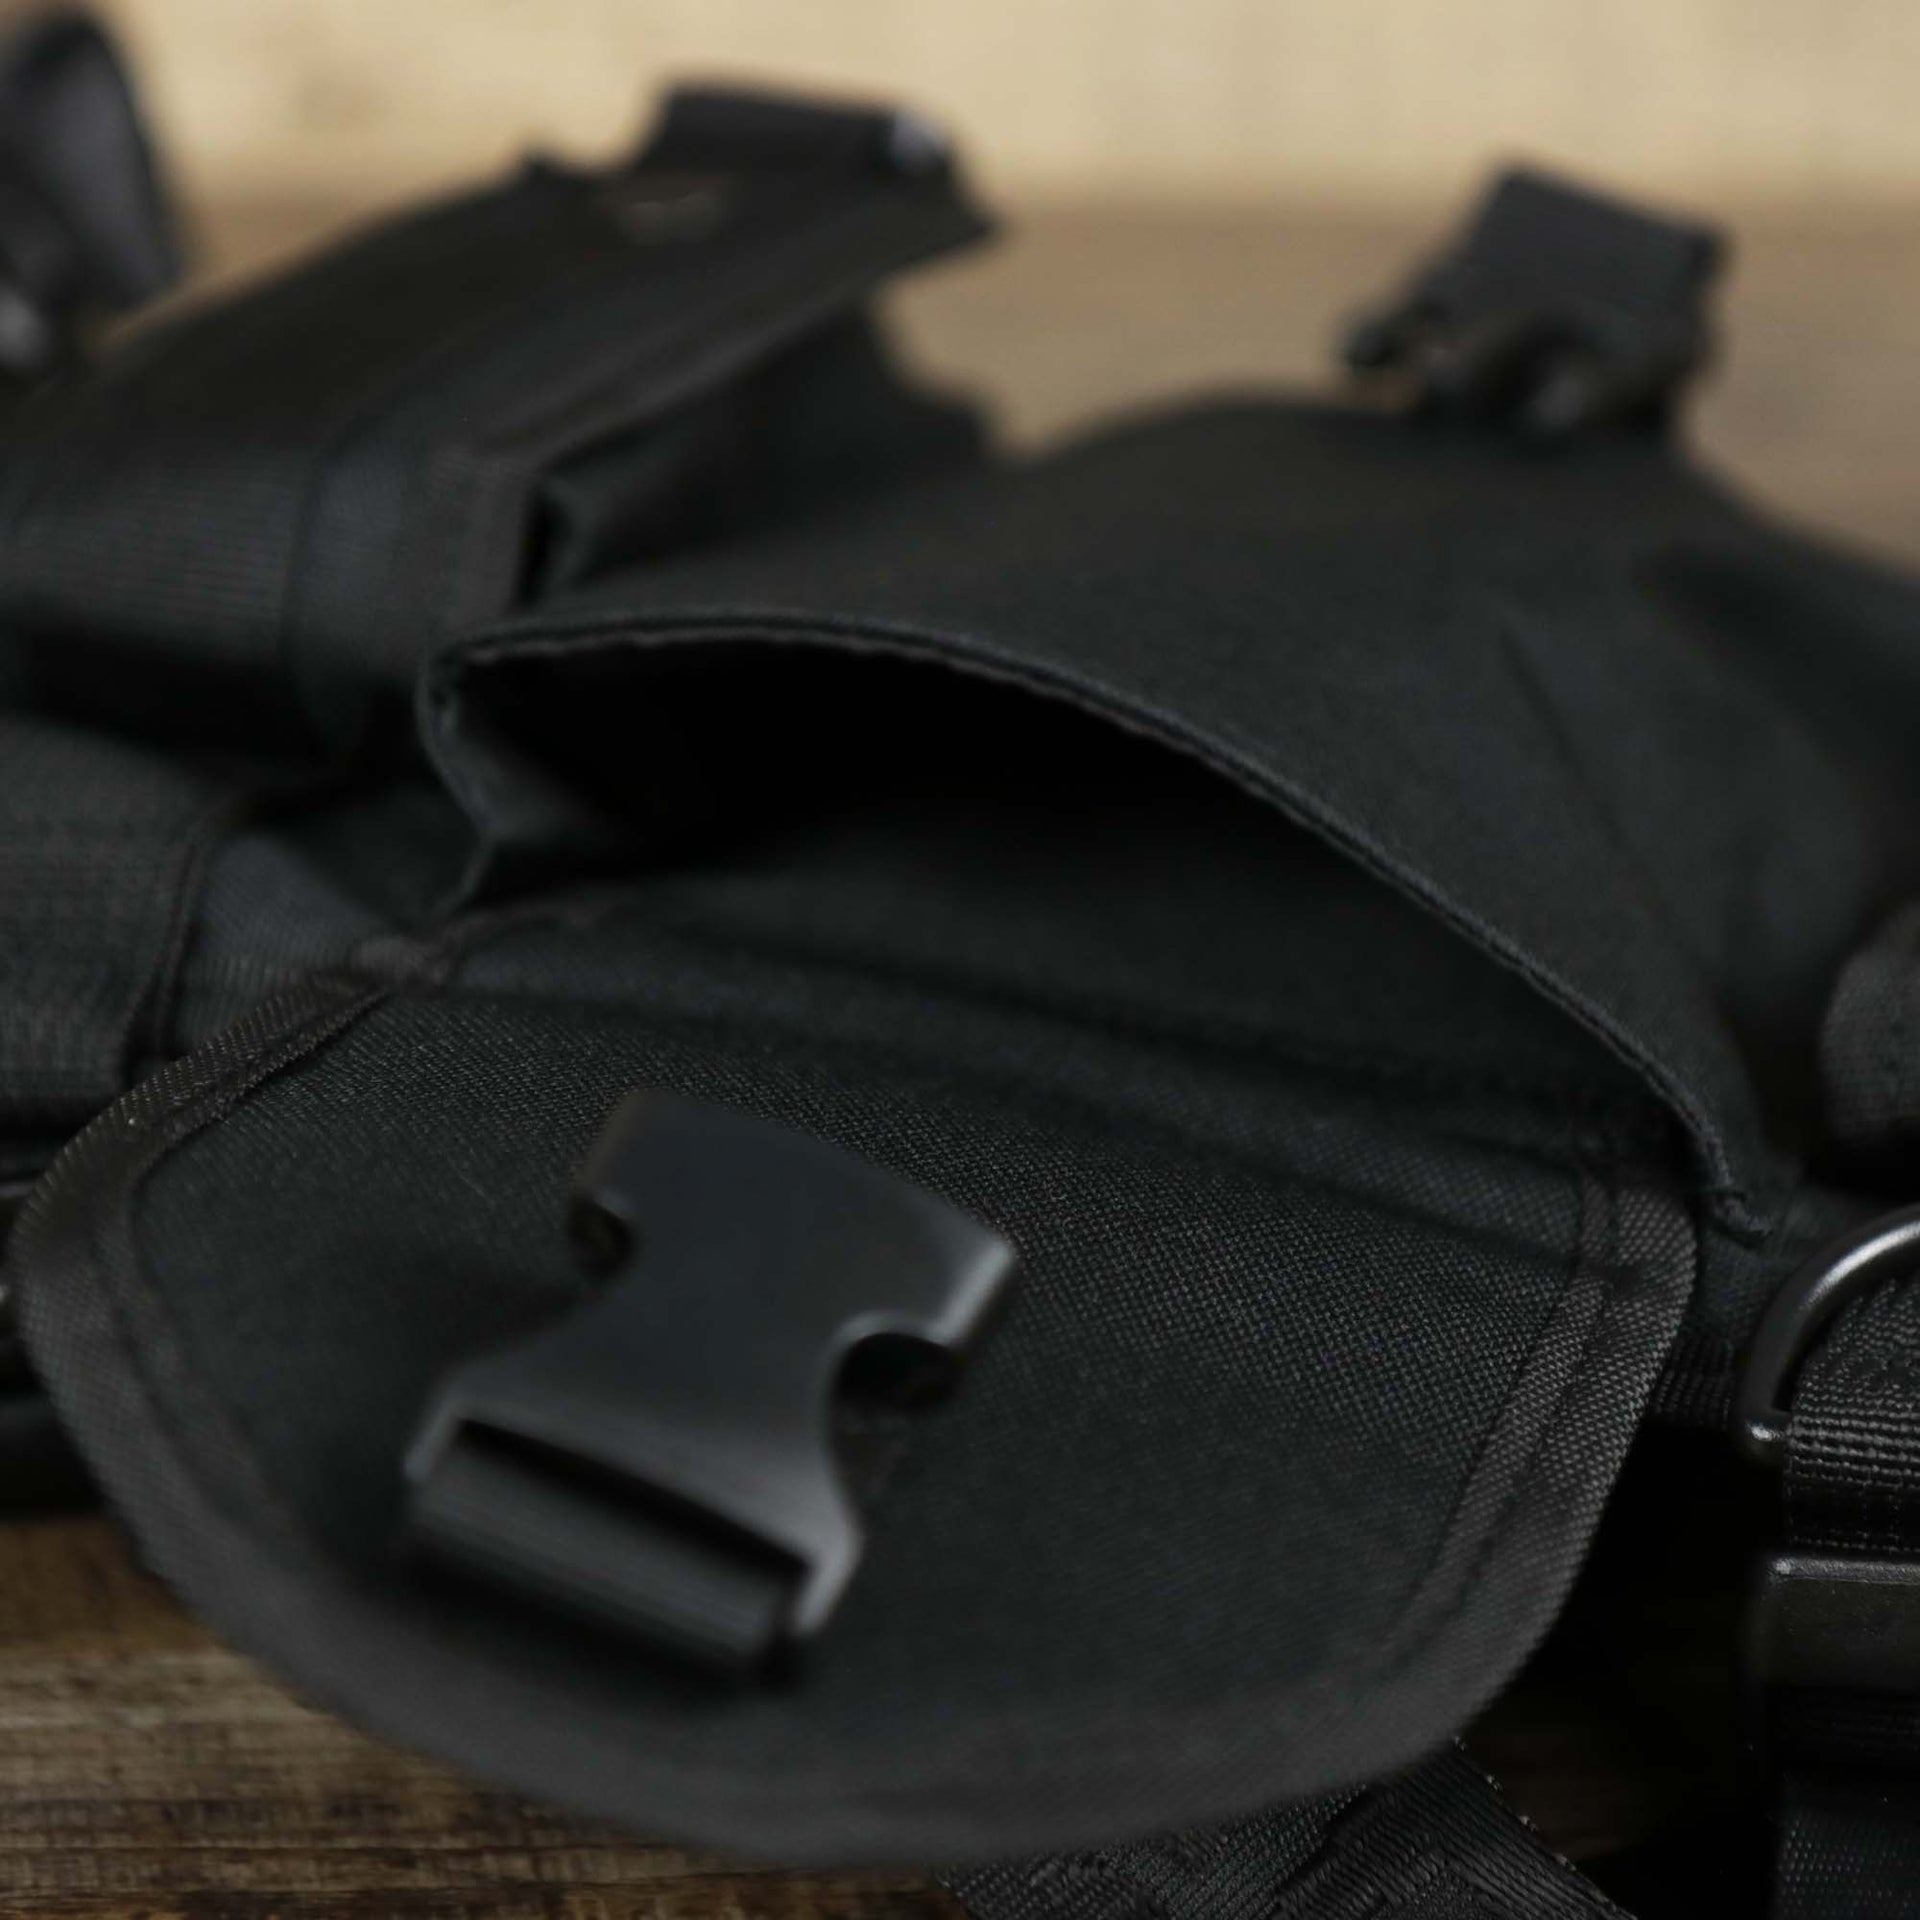 The clasp on the Streetwear Tactics Chest Bag Utility Vest | Official Black